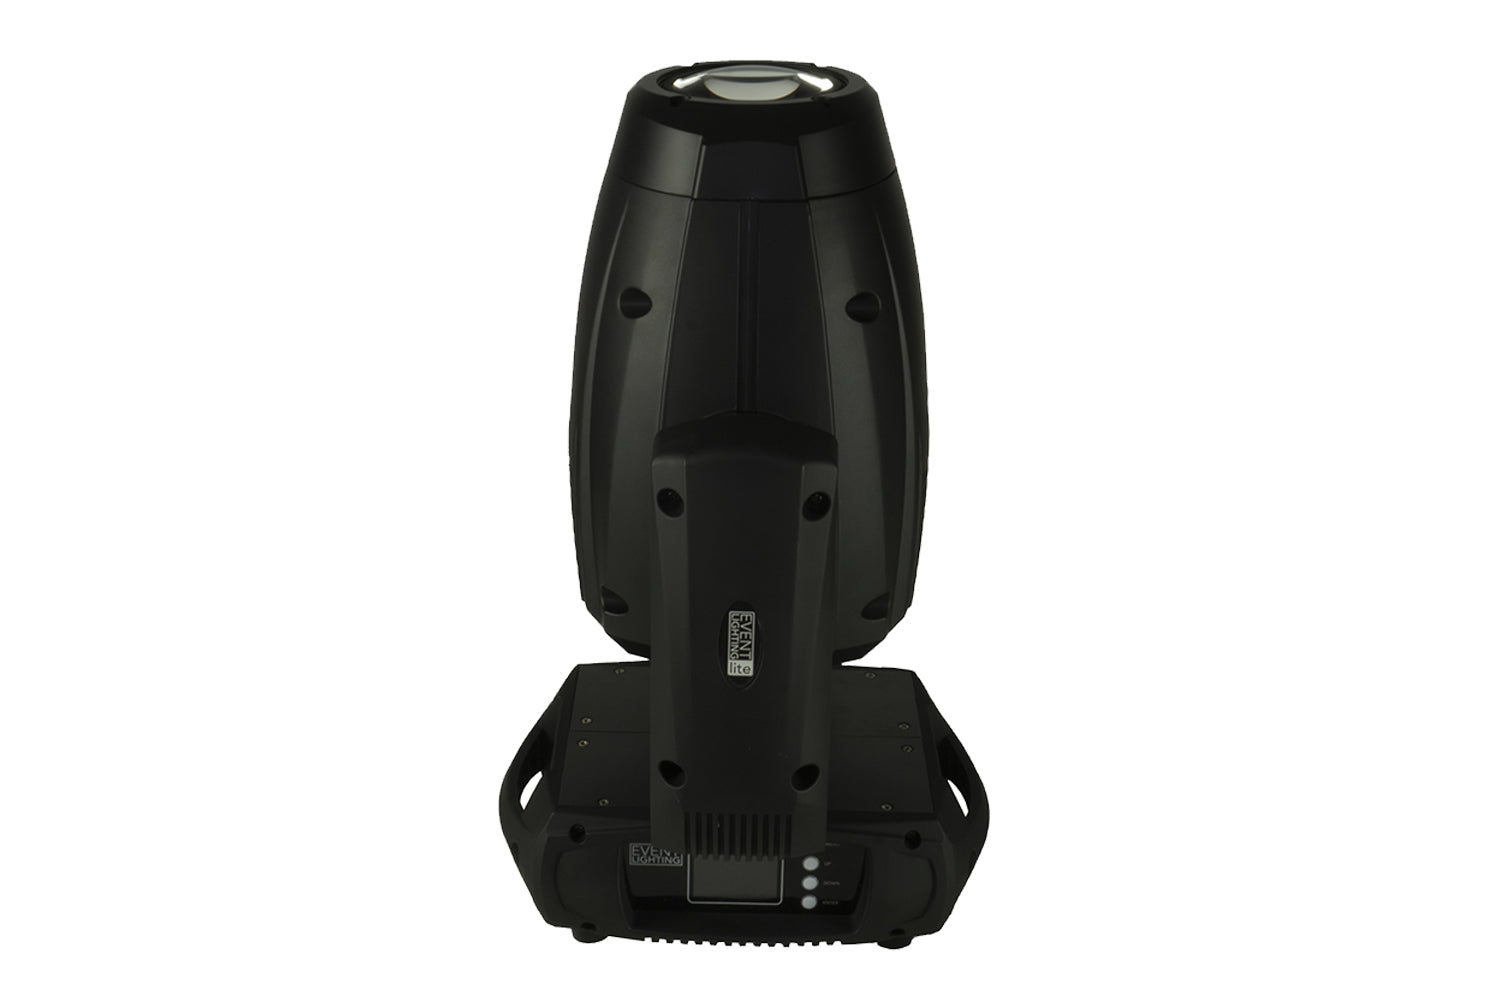 Event Lighting Lite LM250 Moving Head, side, angled from top